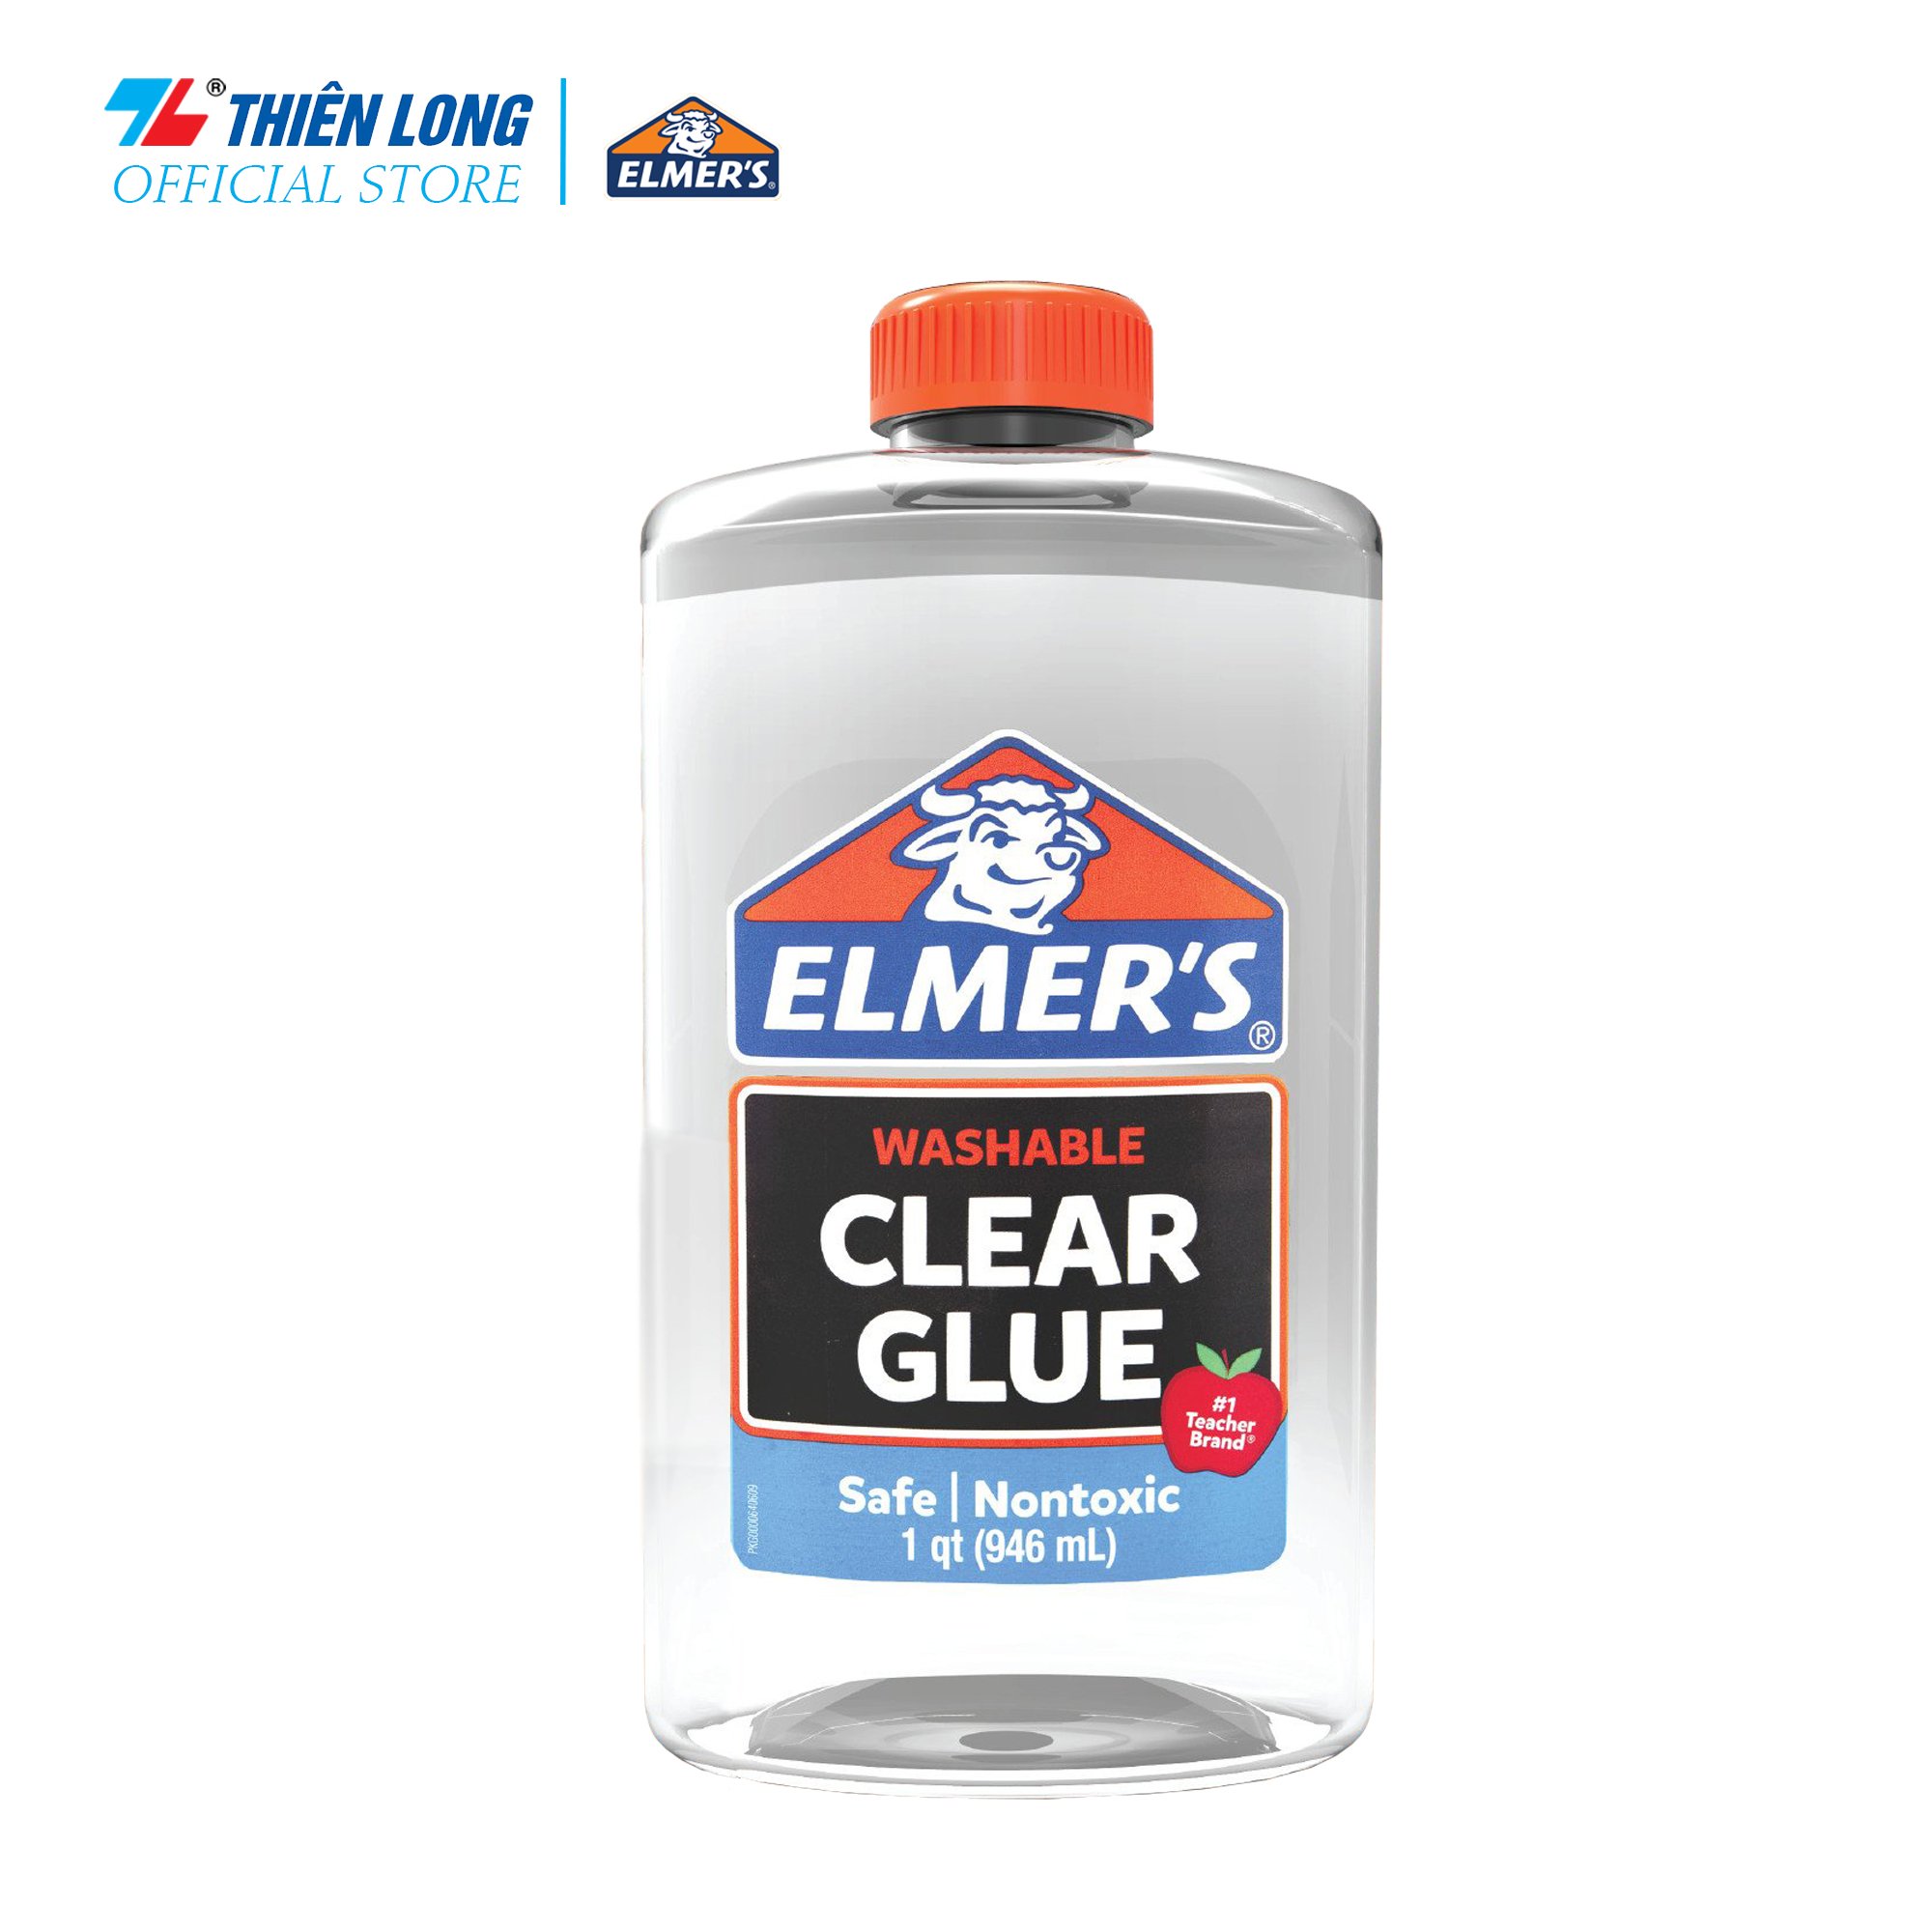 Keo Washable Clear Glue Elmer's Trong Suốt